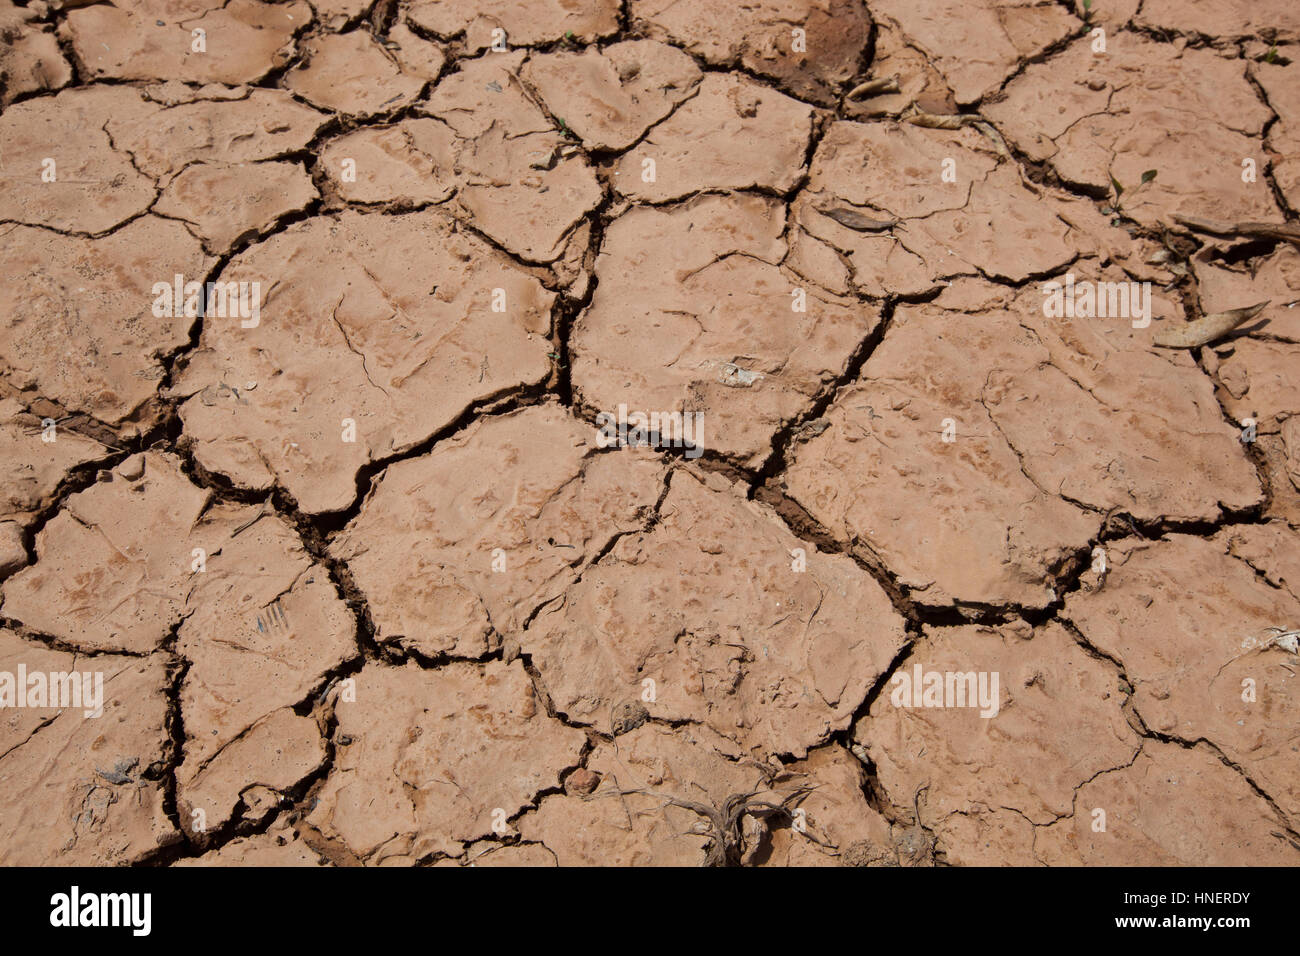 Close-up view of dry cracked soil Stock Photo